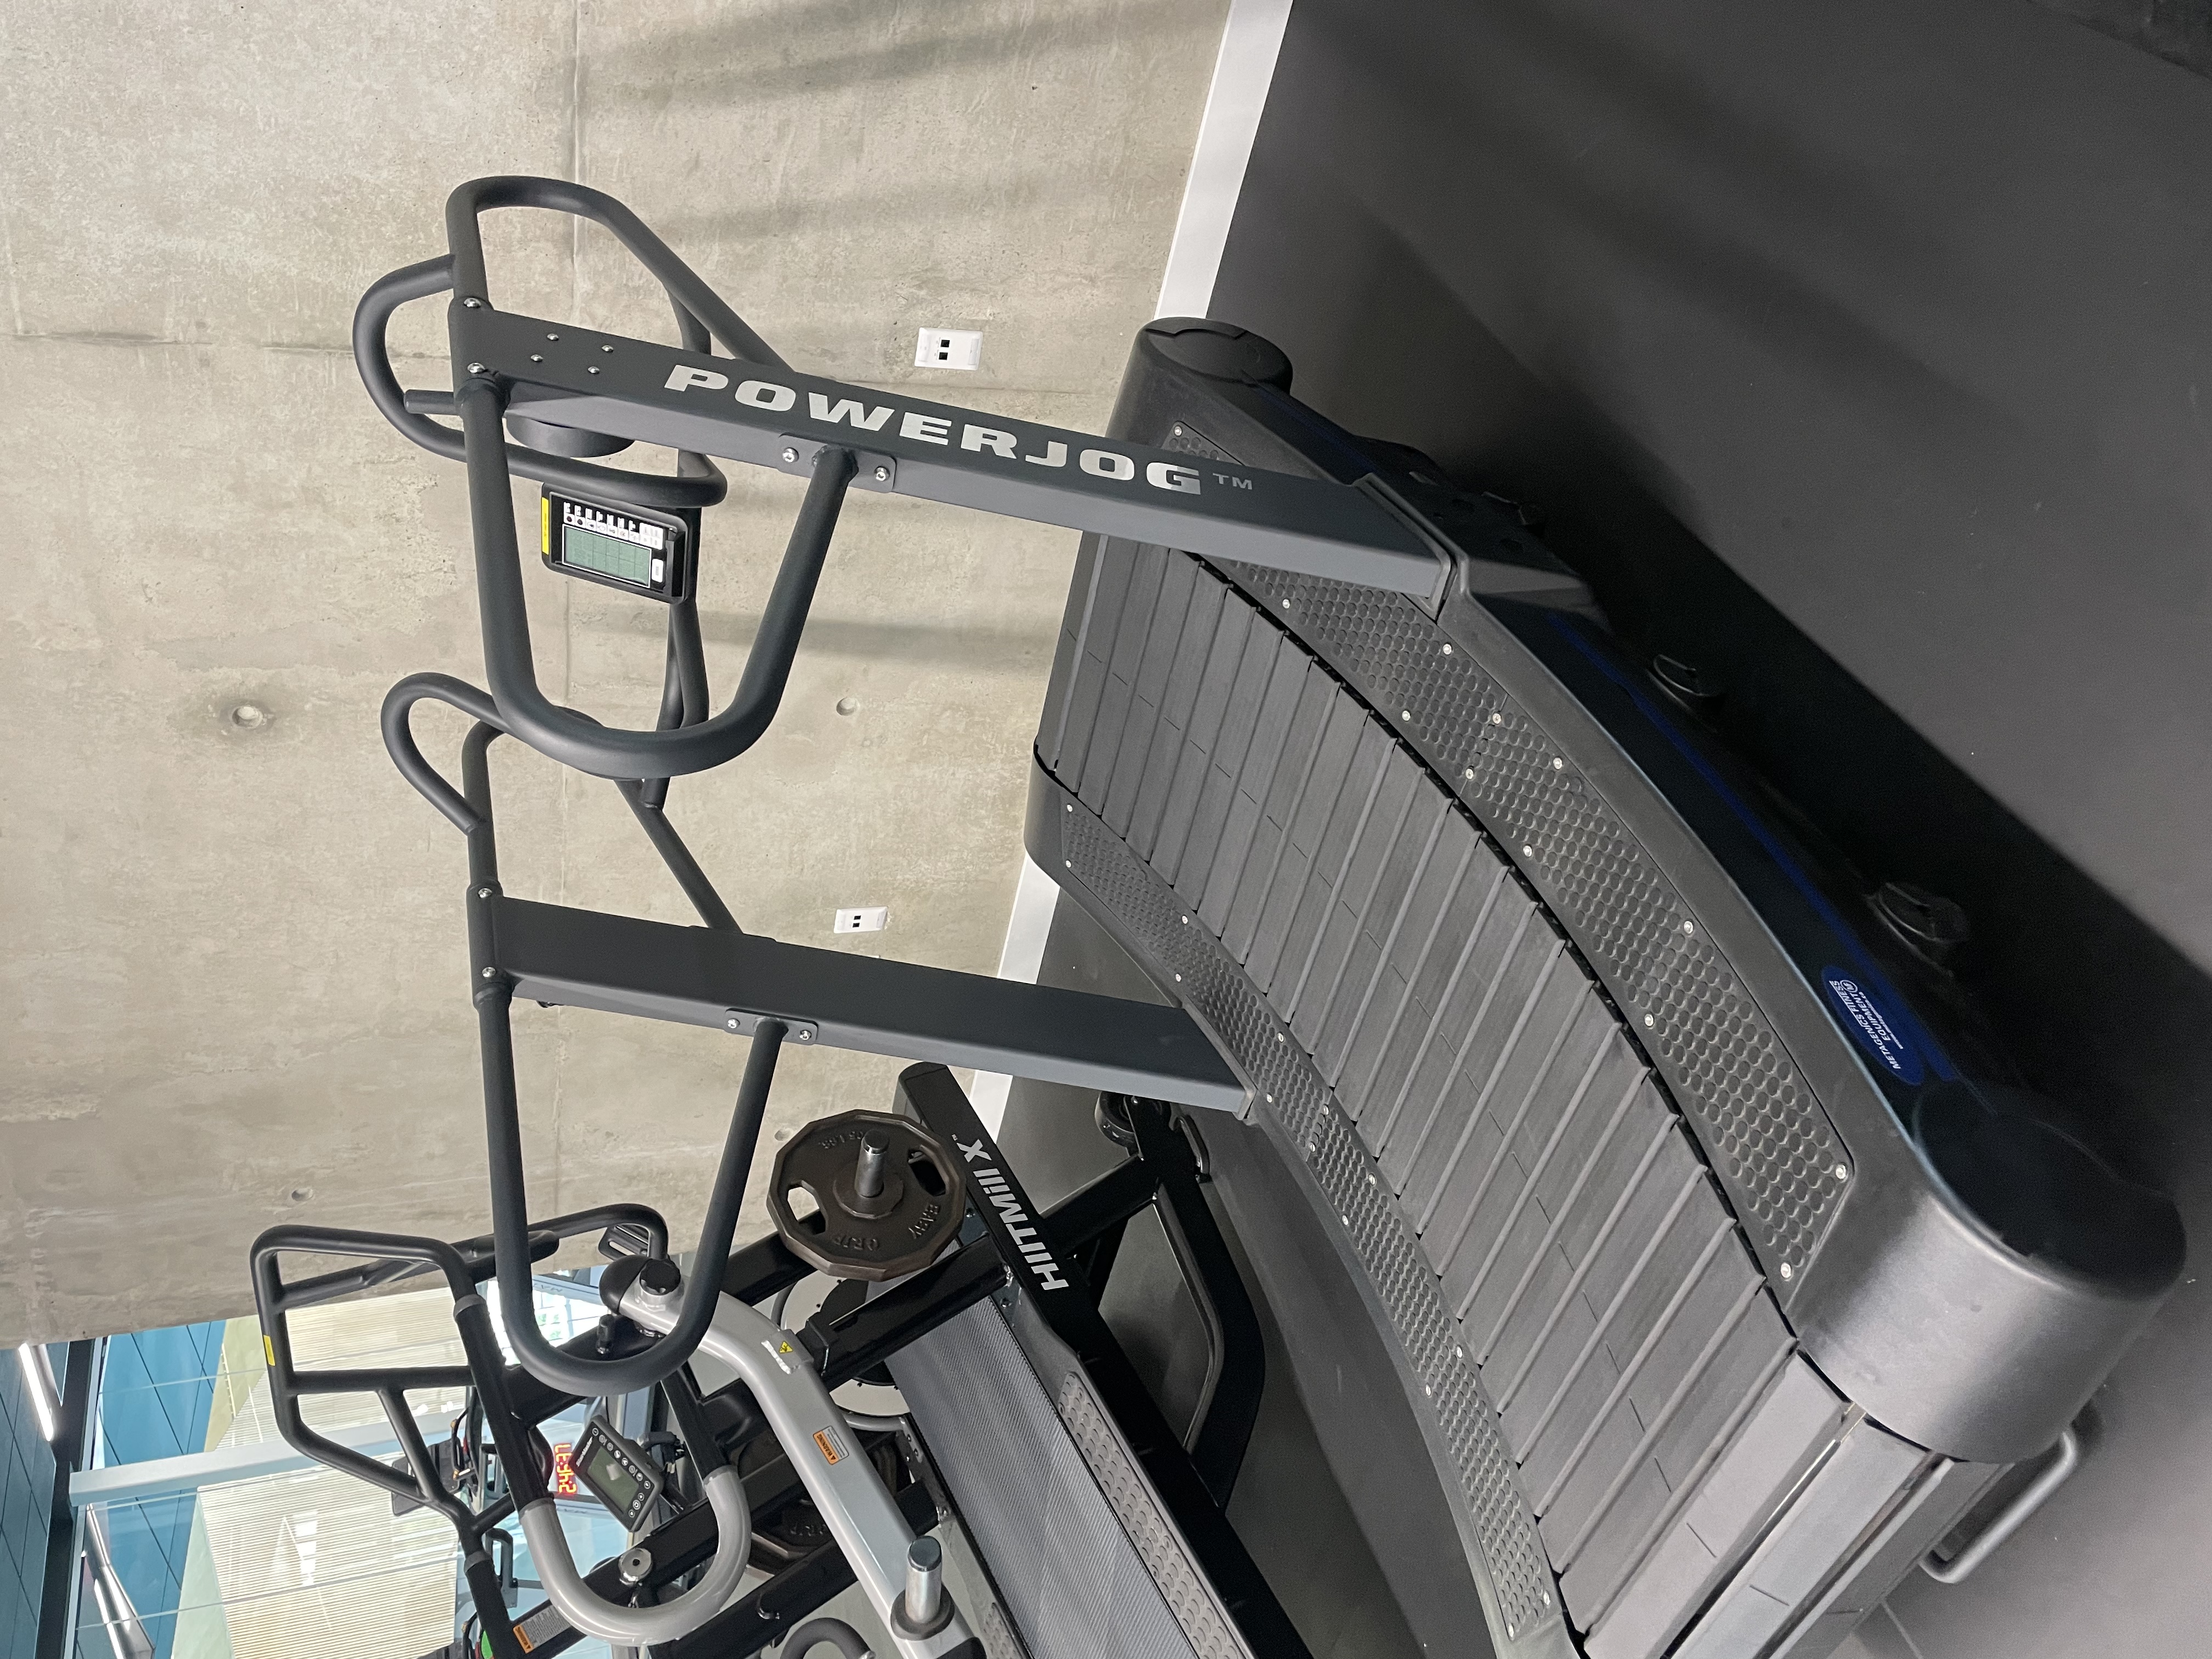 Powerjog Self-propelled treadmill with resistance